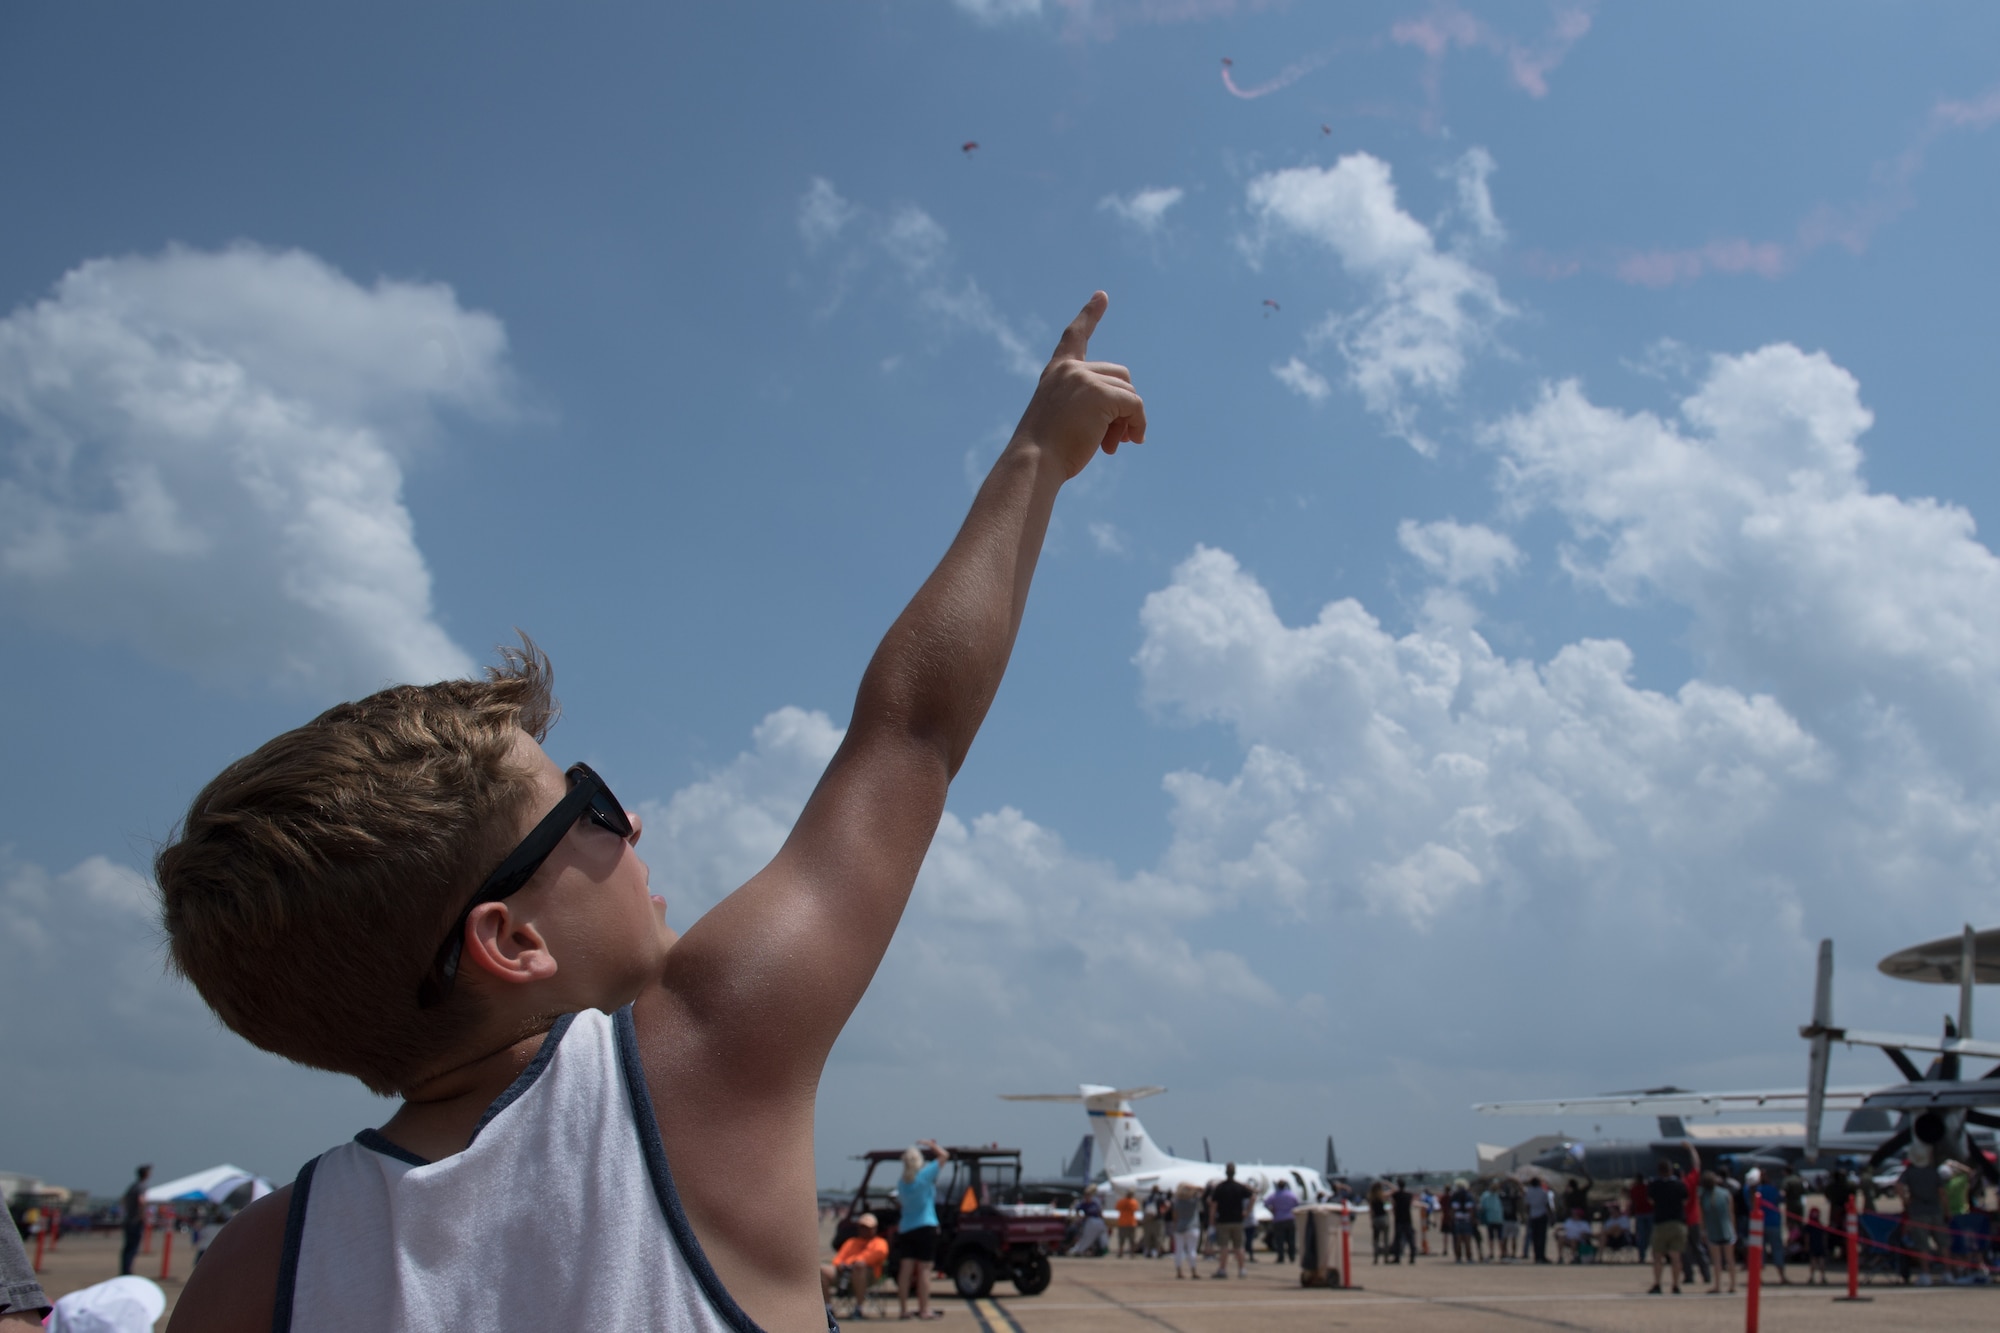 A spectator watches the U.S. Army Special Operations Command Black Daggers Parachute Demonstration Team perform during the Defenders of Liberty Air & Space Show at Barksdale Air Force Base, La., May 19, 2019.  The airshow was first held in 1933 and is a full weekend of military and civilian aircraft and performances and displays. (U.S. Air Force photo by Senior Airman Stuart Bright)